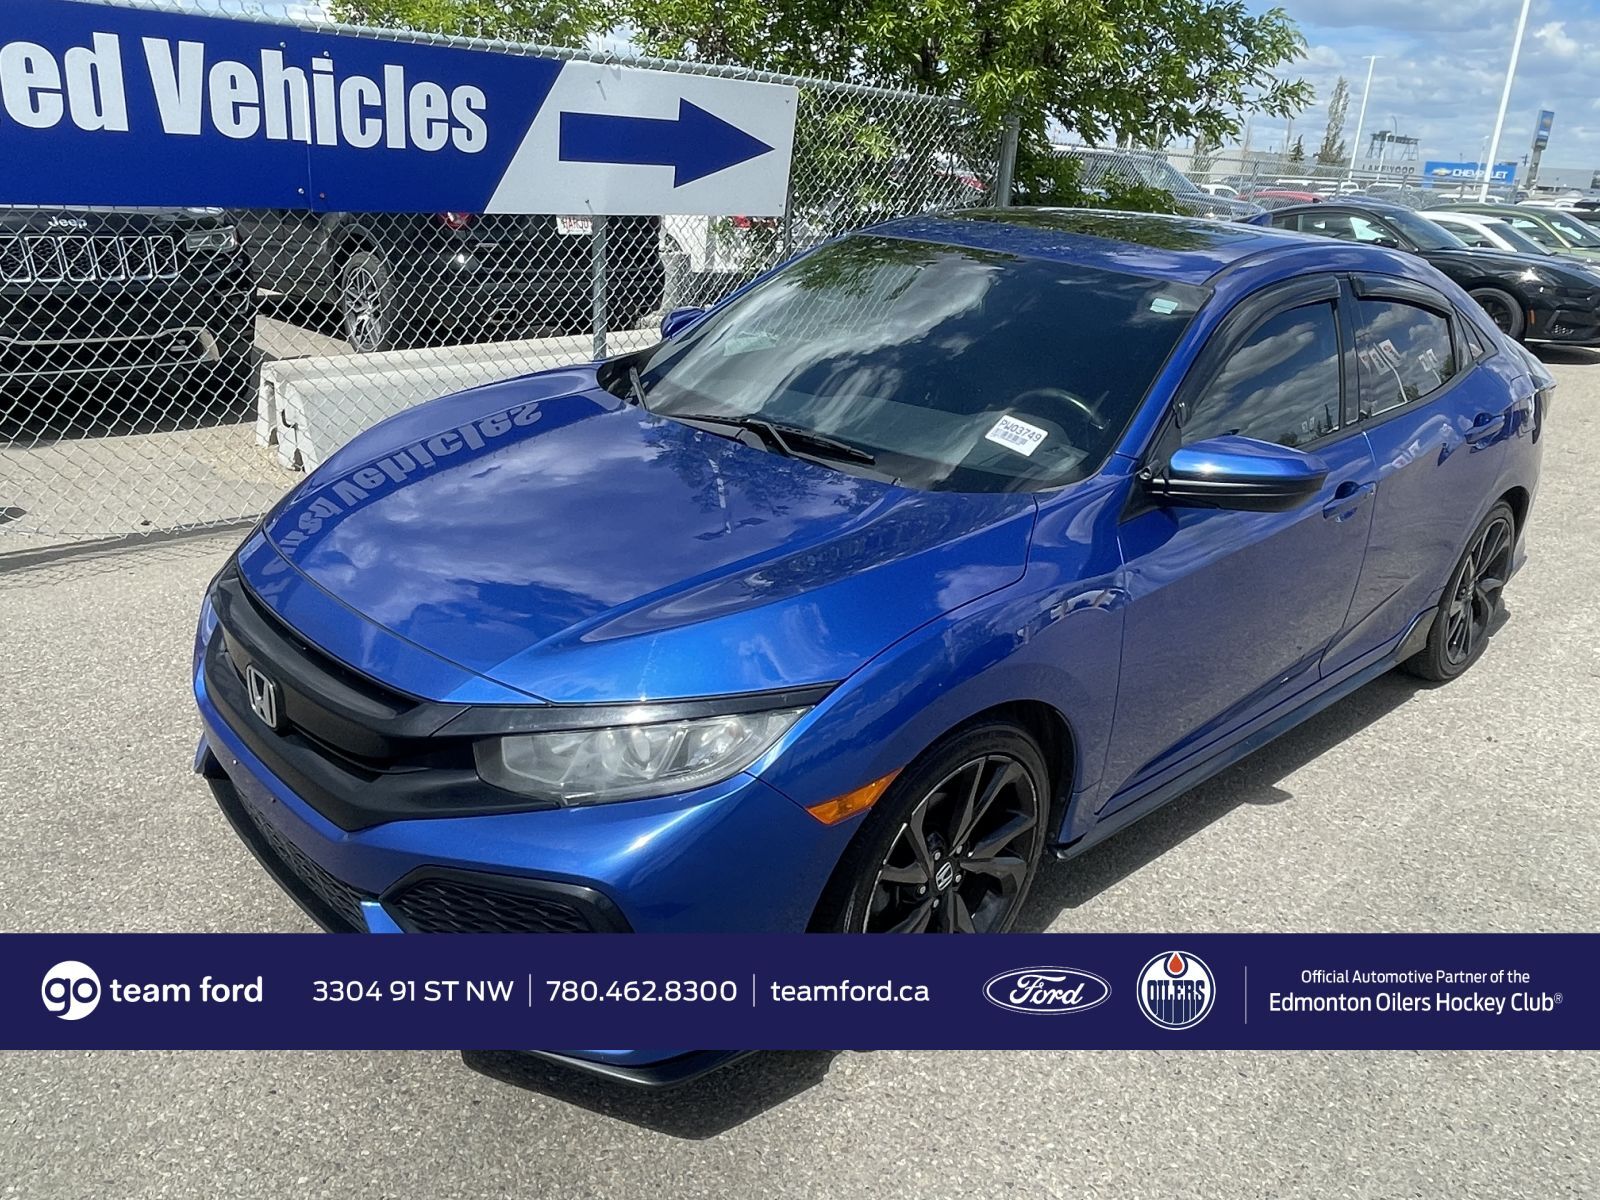 2017 Honda Civic Hatchback SPORT- LEATHER, HEATED SEATS, BLUETOOTH MUCH MORE!